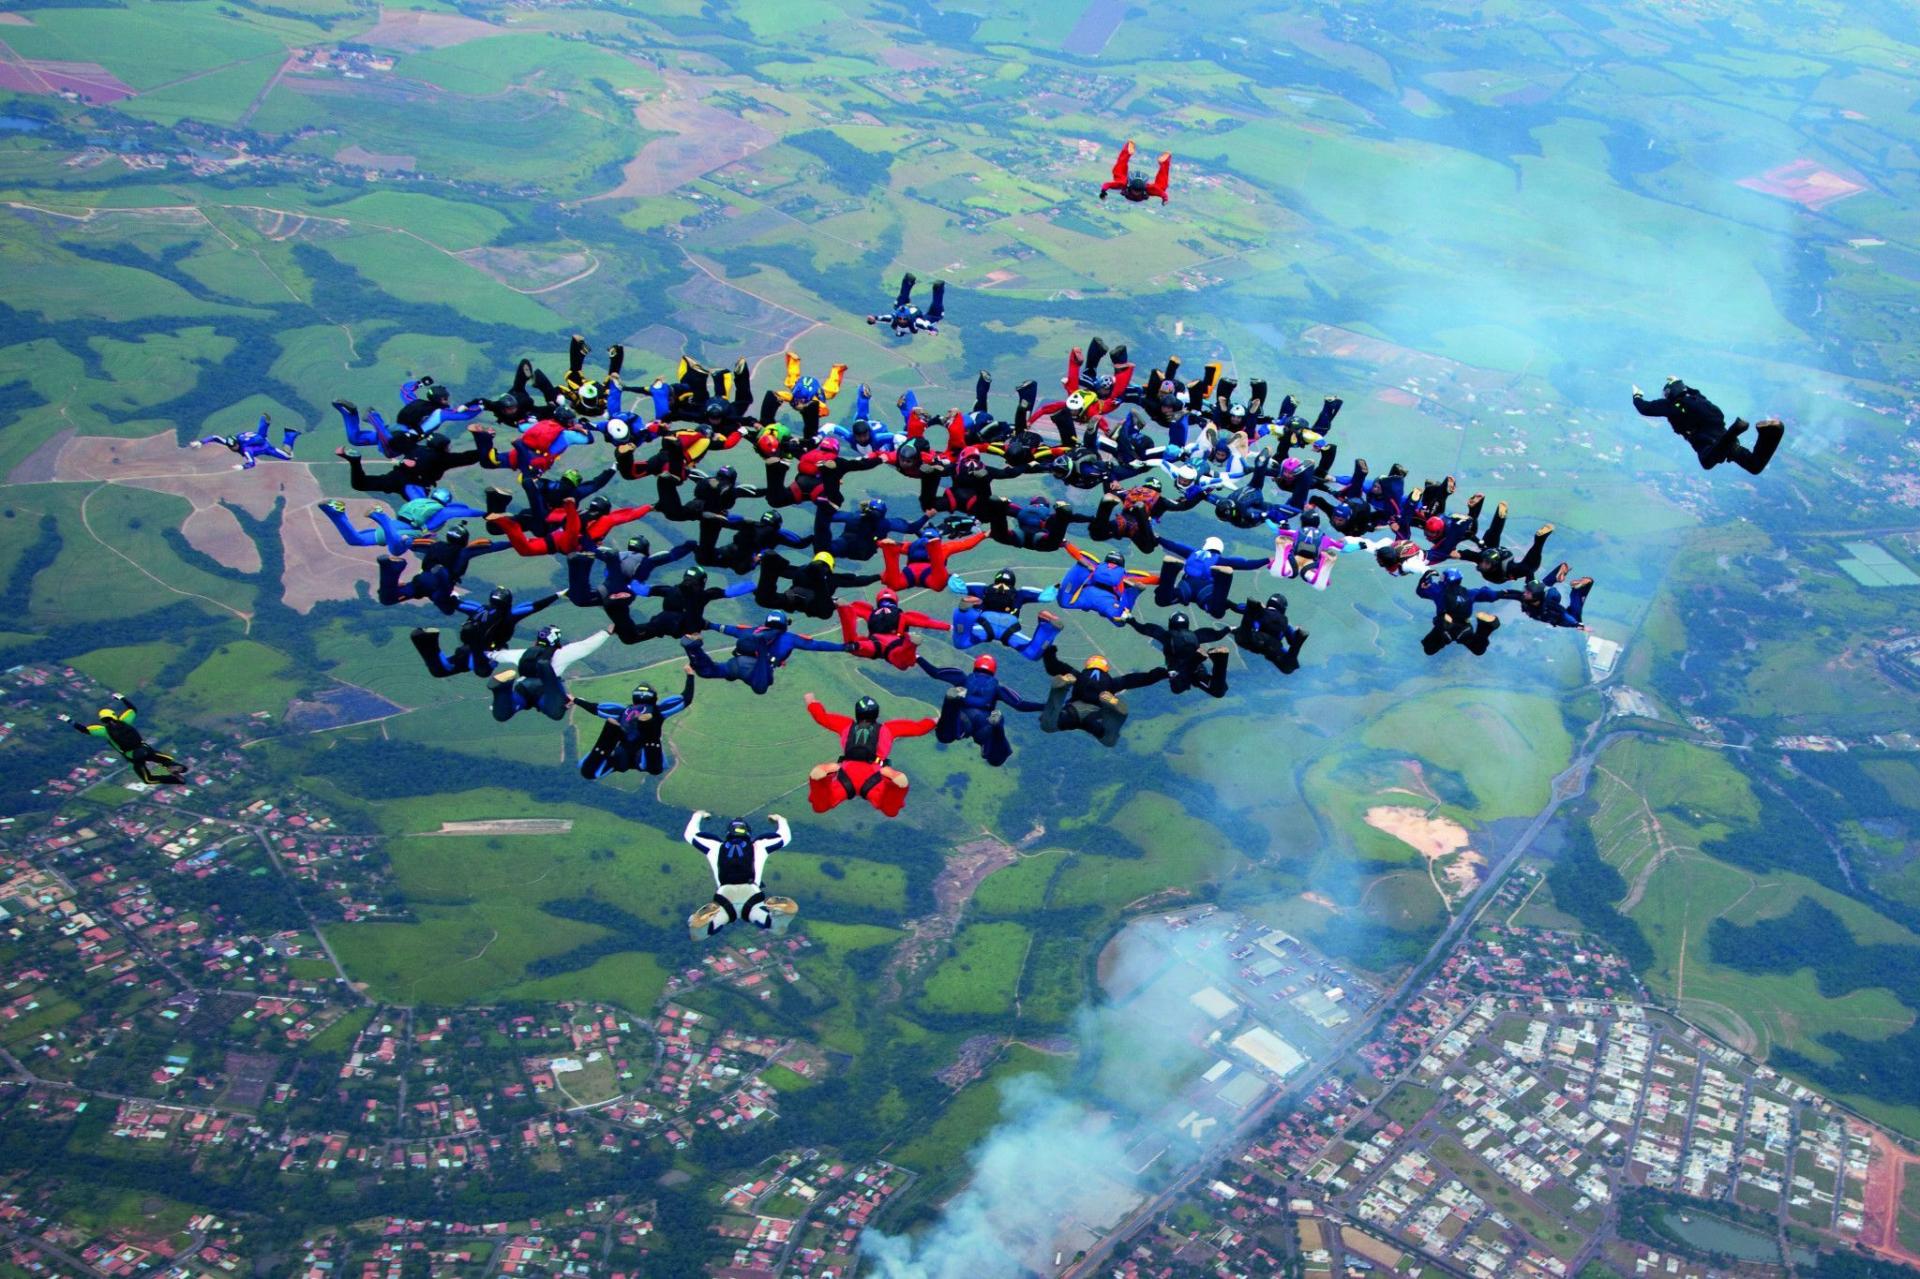 Leap of faith: Join our charity skydive